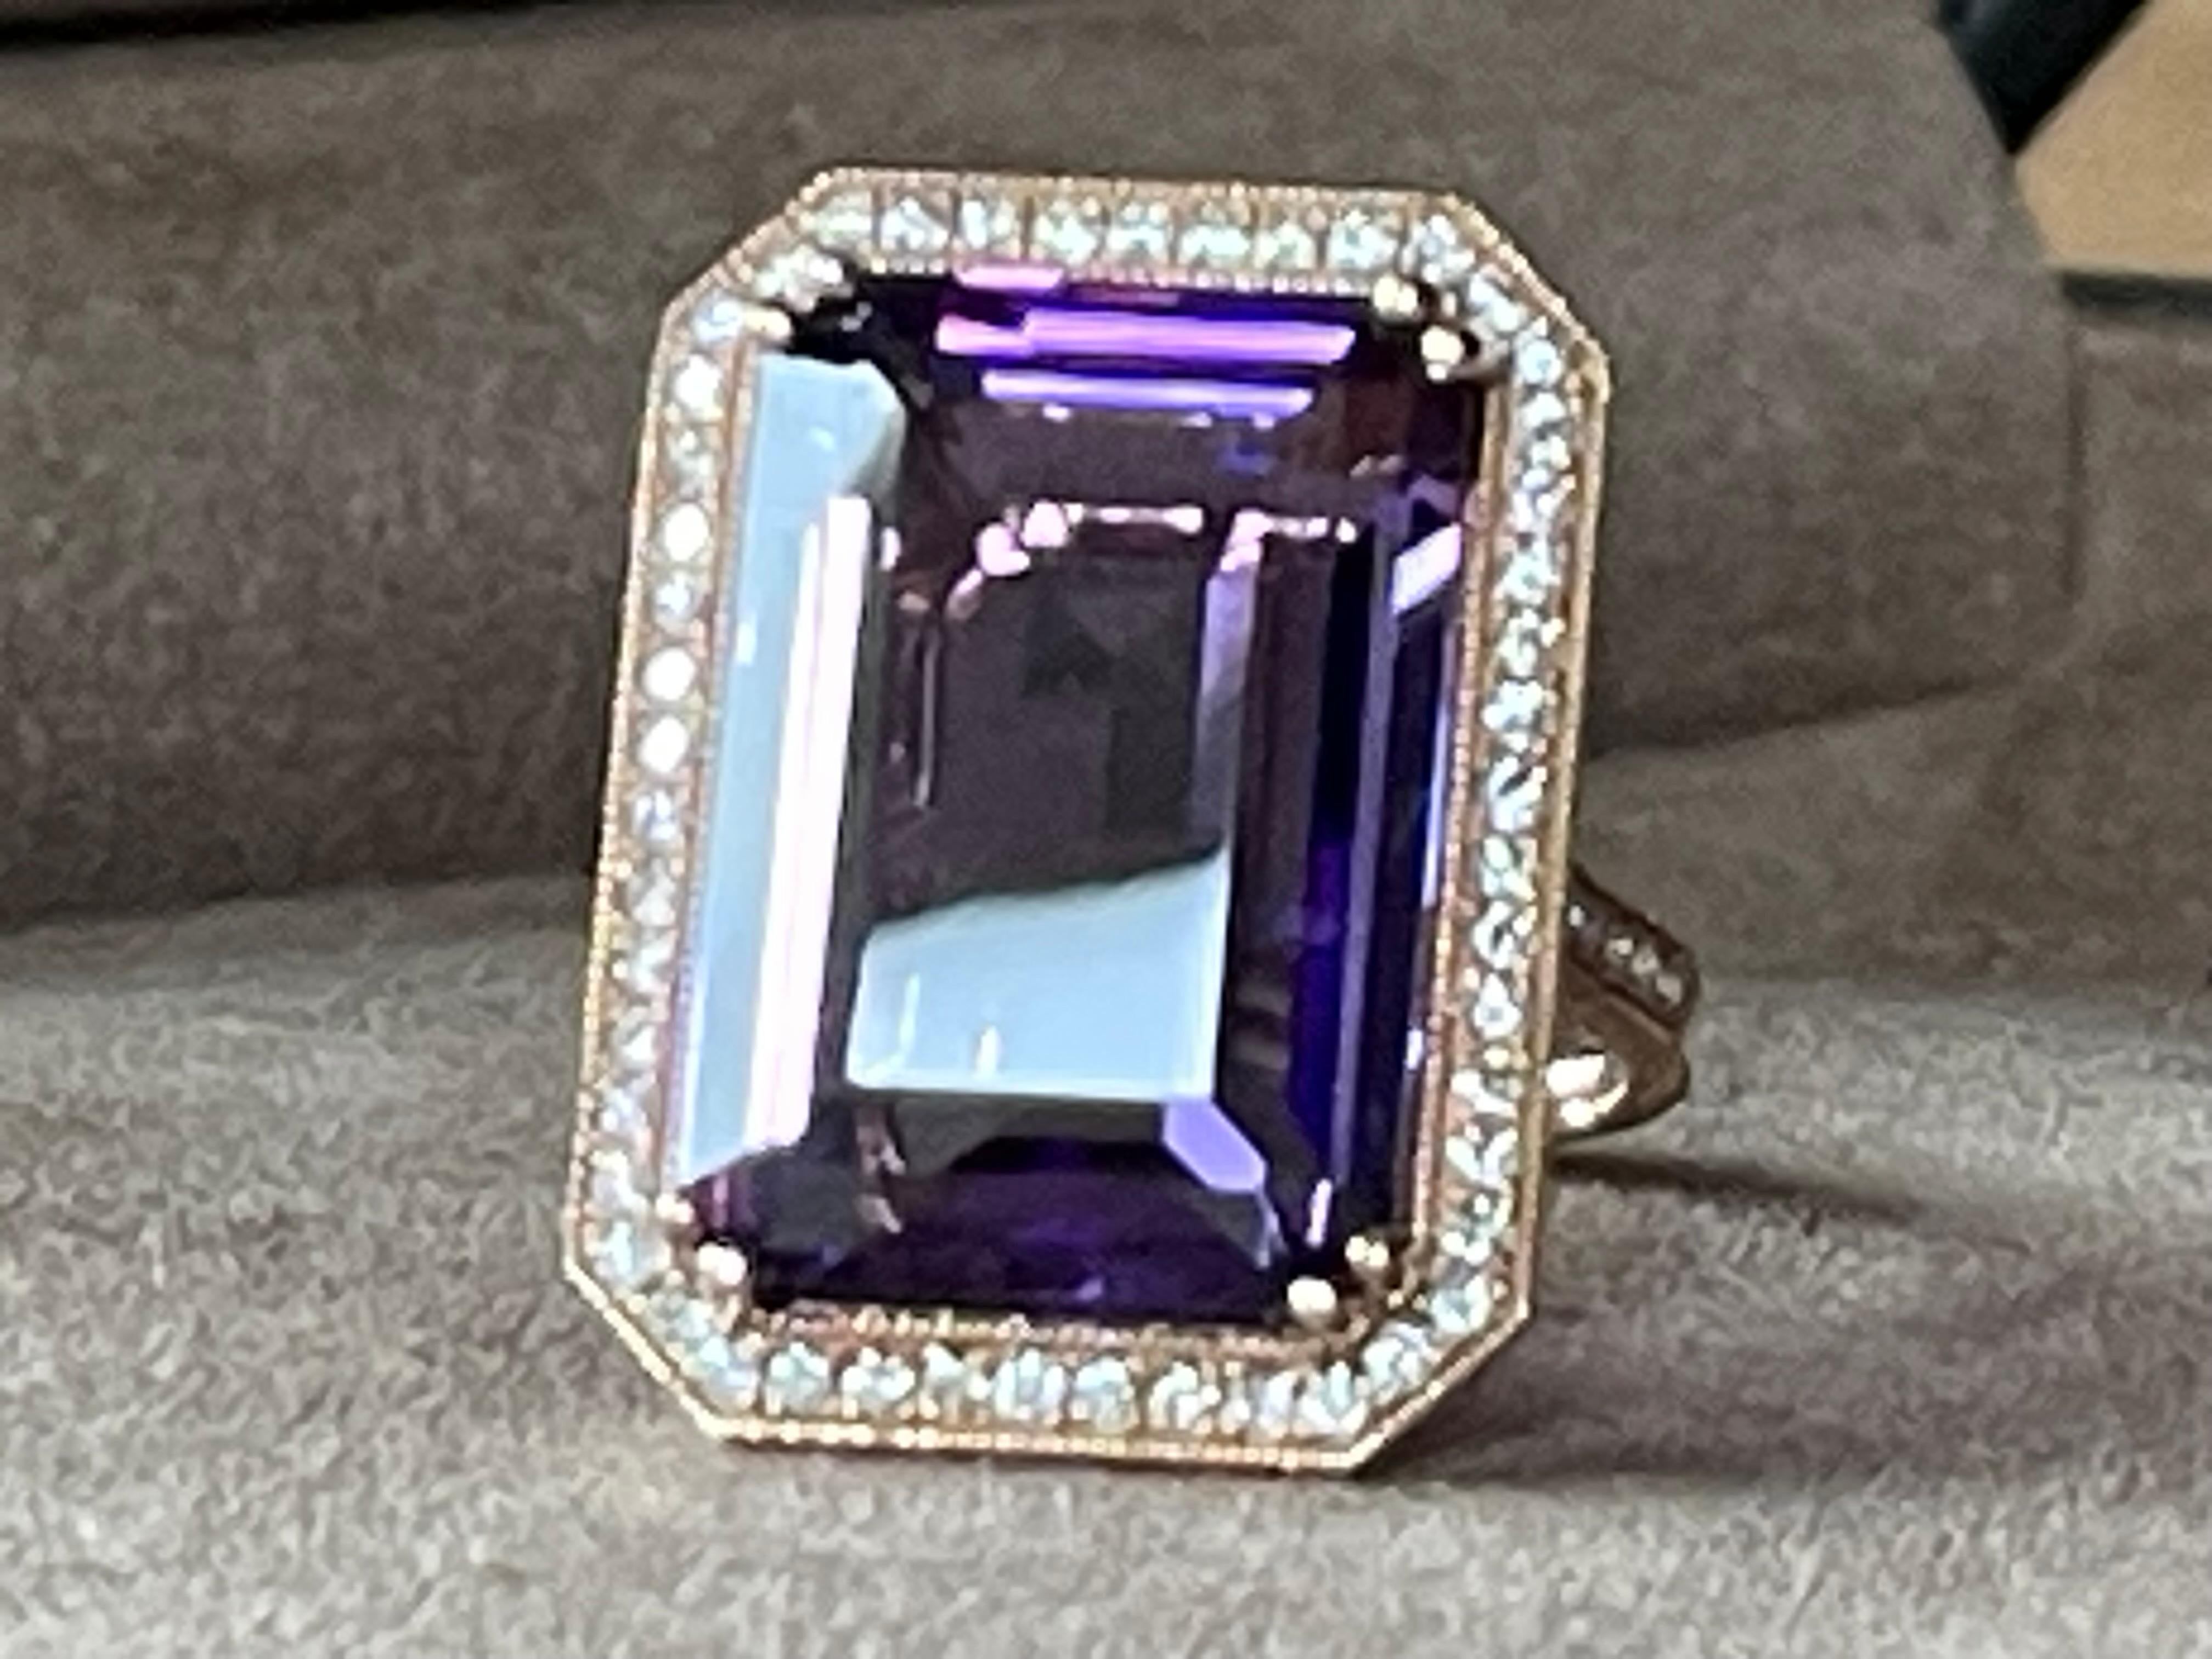 Stunning large prong set emerald cut Amethyst weiging 19.85 ct surrounded by 66 brilliant cut Diamonds weiging 0.65 ct. The intriguing colour of the Rose de France Amethyst with the elegant rose Gold gives a wonderful and fresh colour